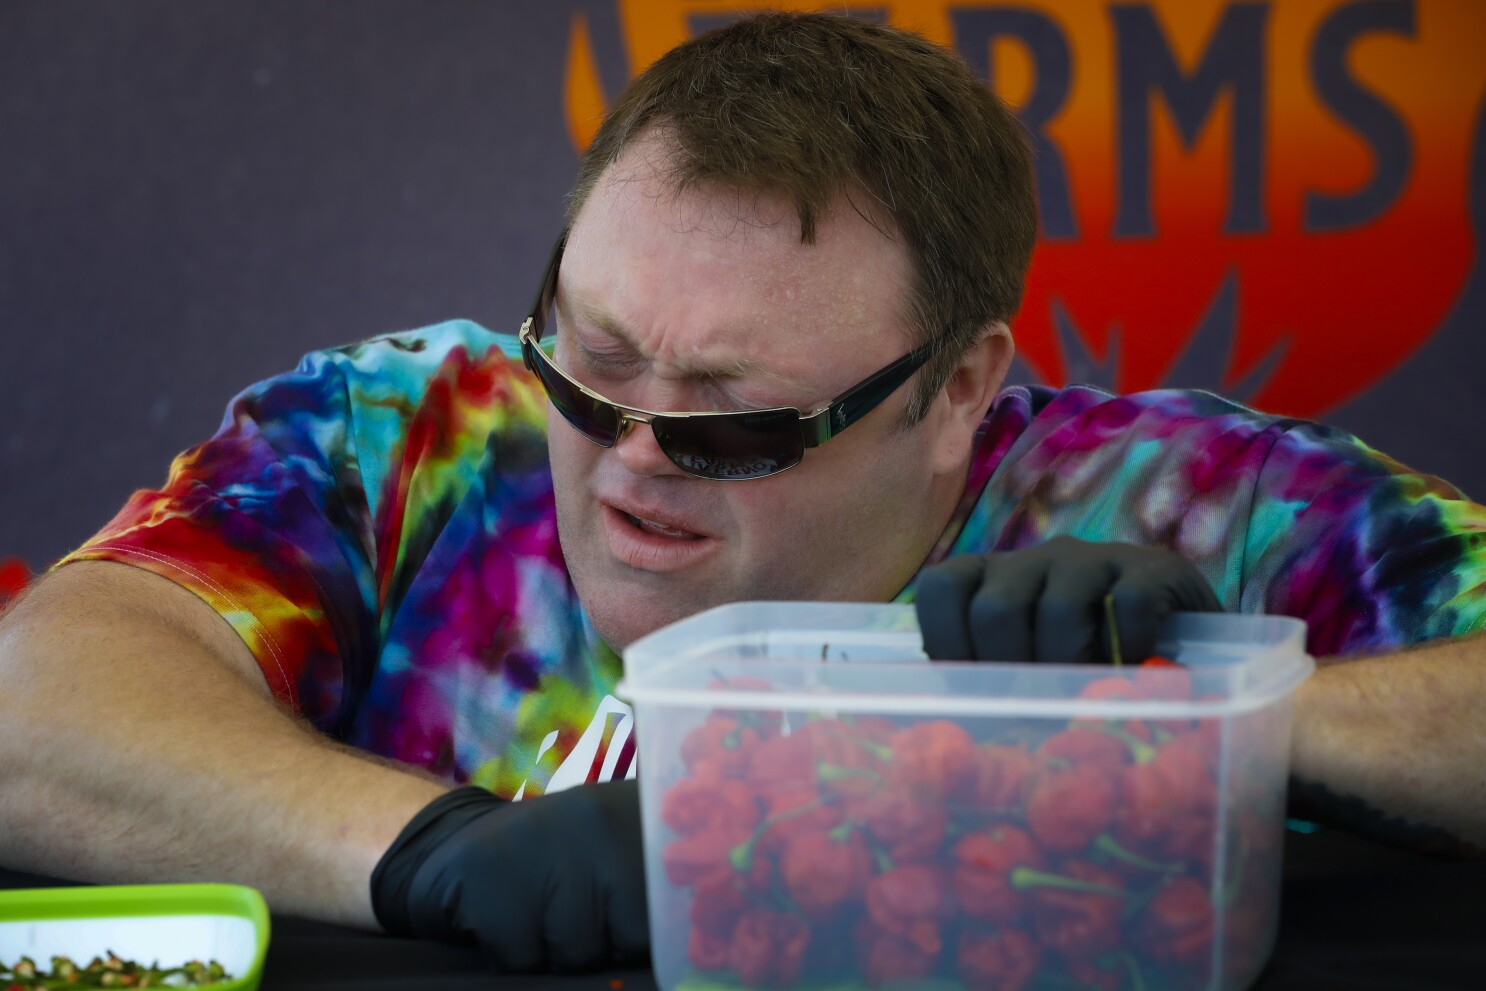 San Diego Pepper Enthusiast Eats 44 Carolina Reapers The World S Hottest Chilis The San Diego Union Tribune